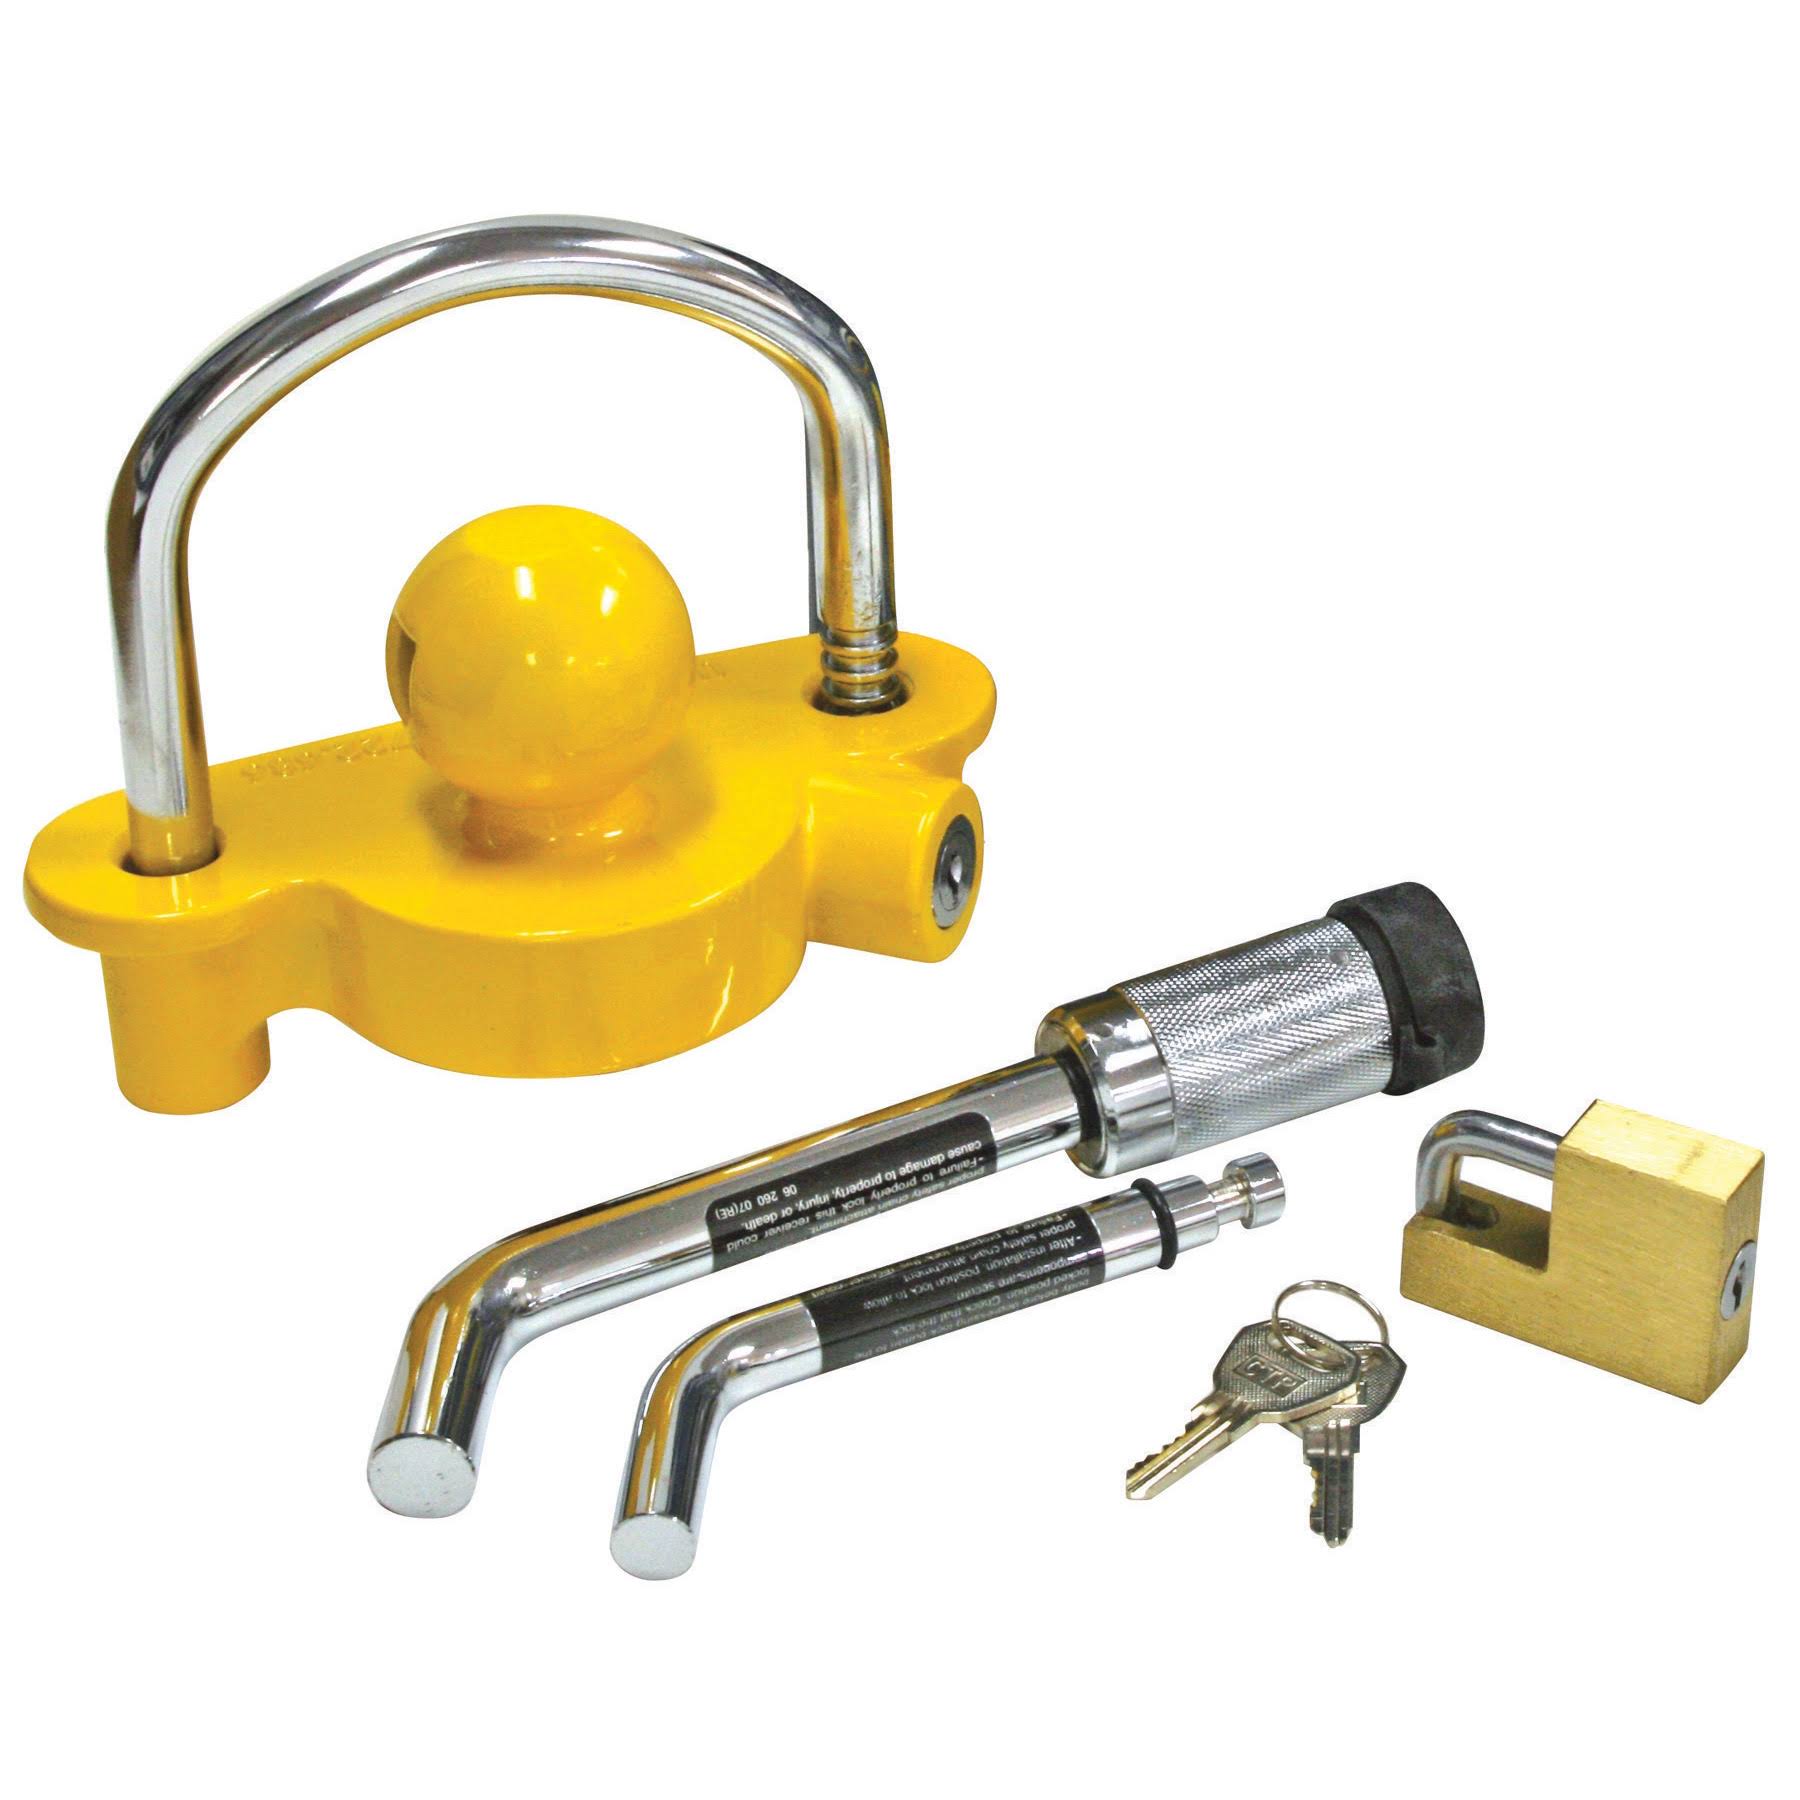 Reese Towpower 7014700 Tow 'N Store Lock Kit